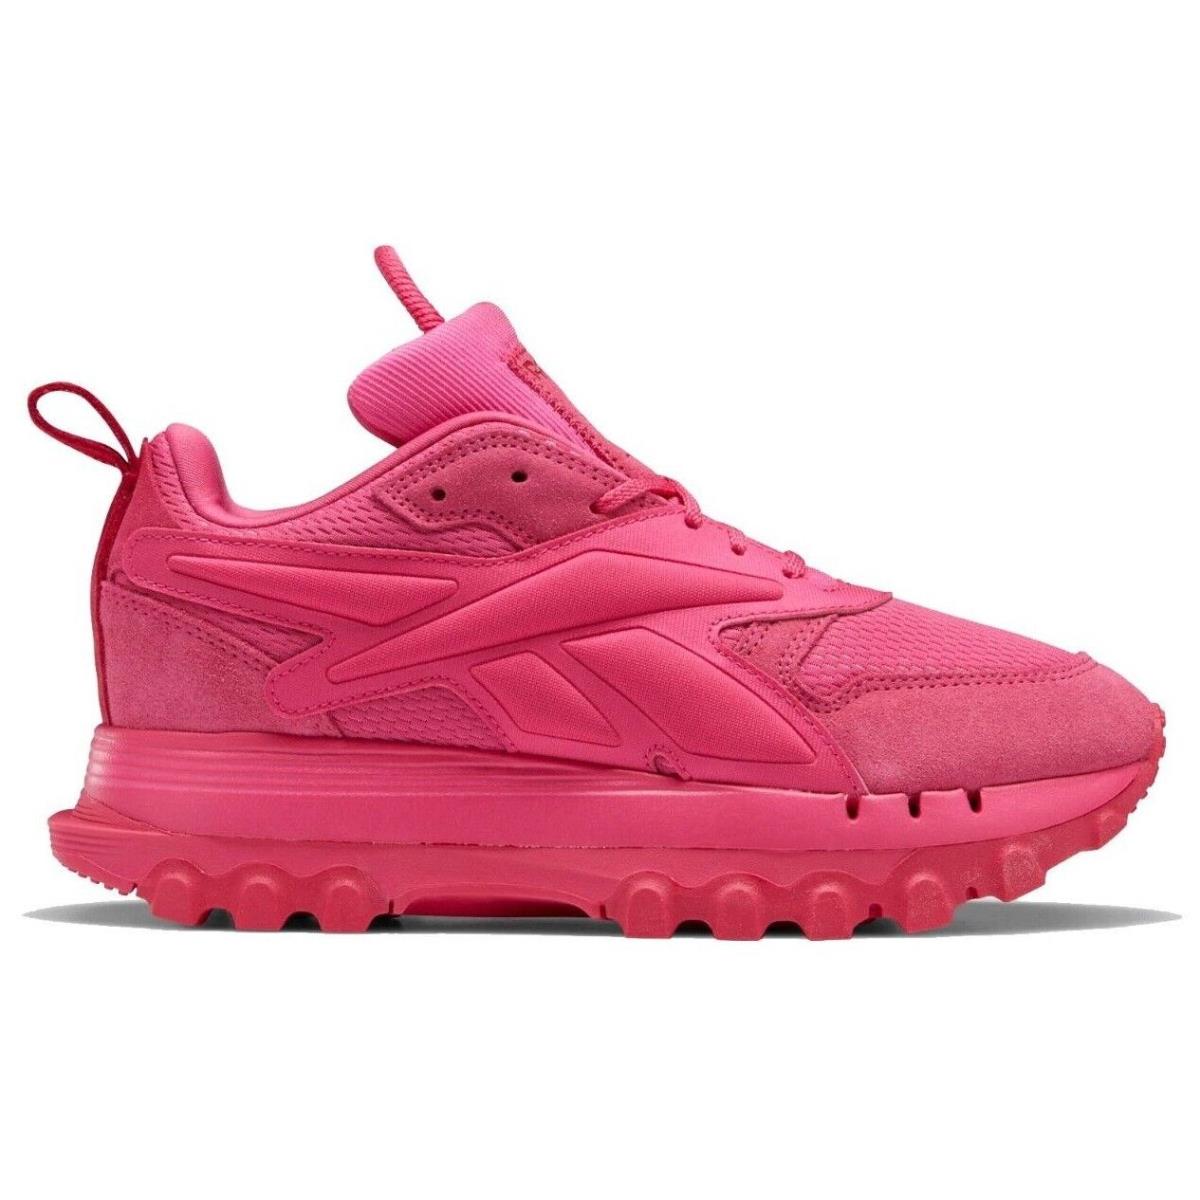 Reebok Cardi B Classic Leather V2 Women`s Shoes All Colors US Sizes 6-11 Pink Fusion/Pink Fusion/Pink Fusion